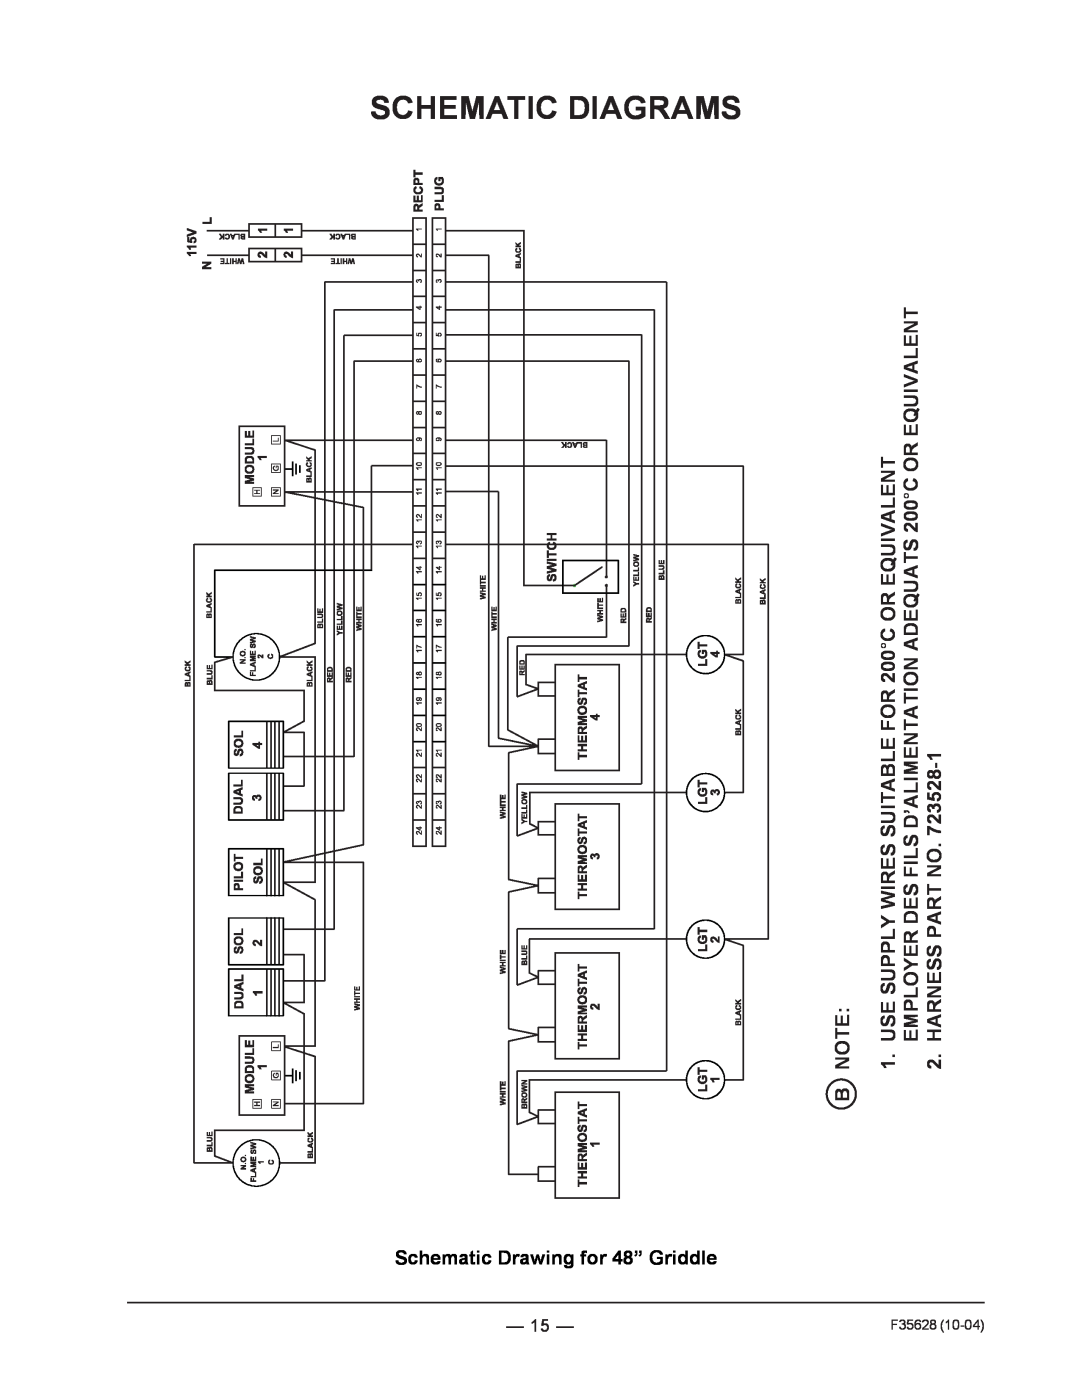 Vulcan-Hart service manual Schematic Drawing for 48” Griddle, Schematic Diagrams, F35628 